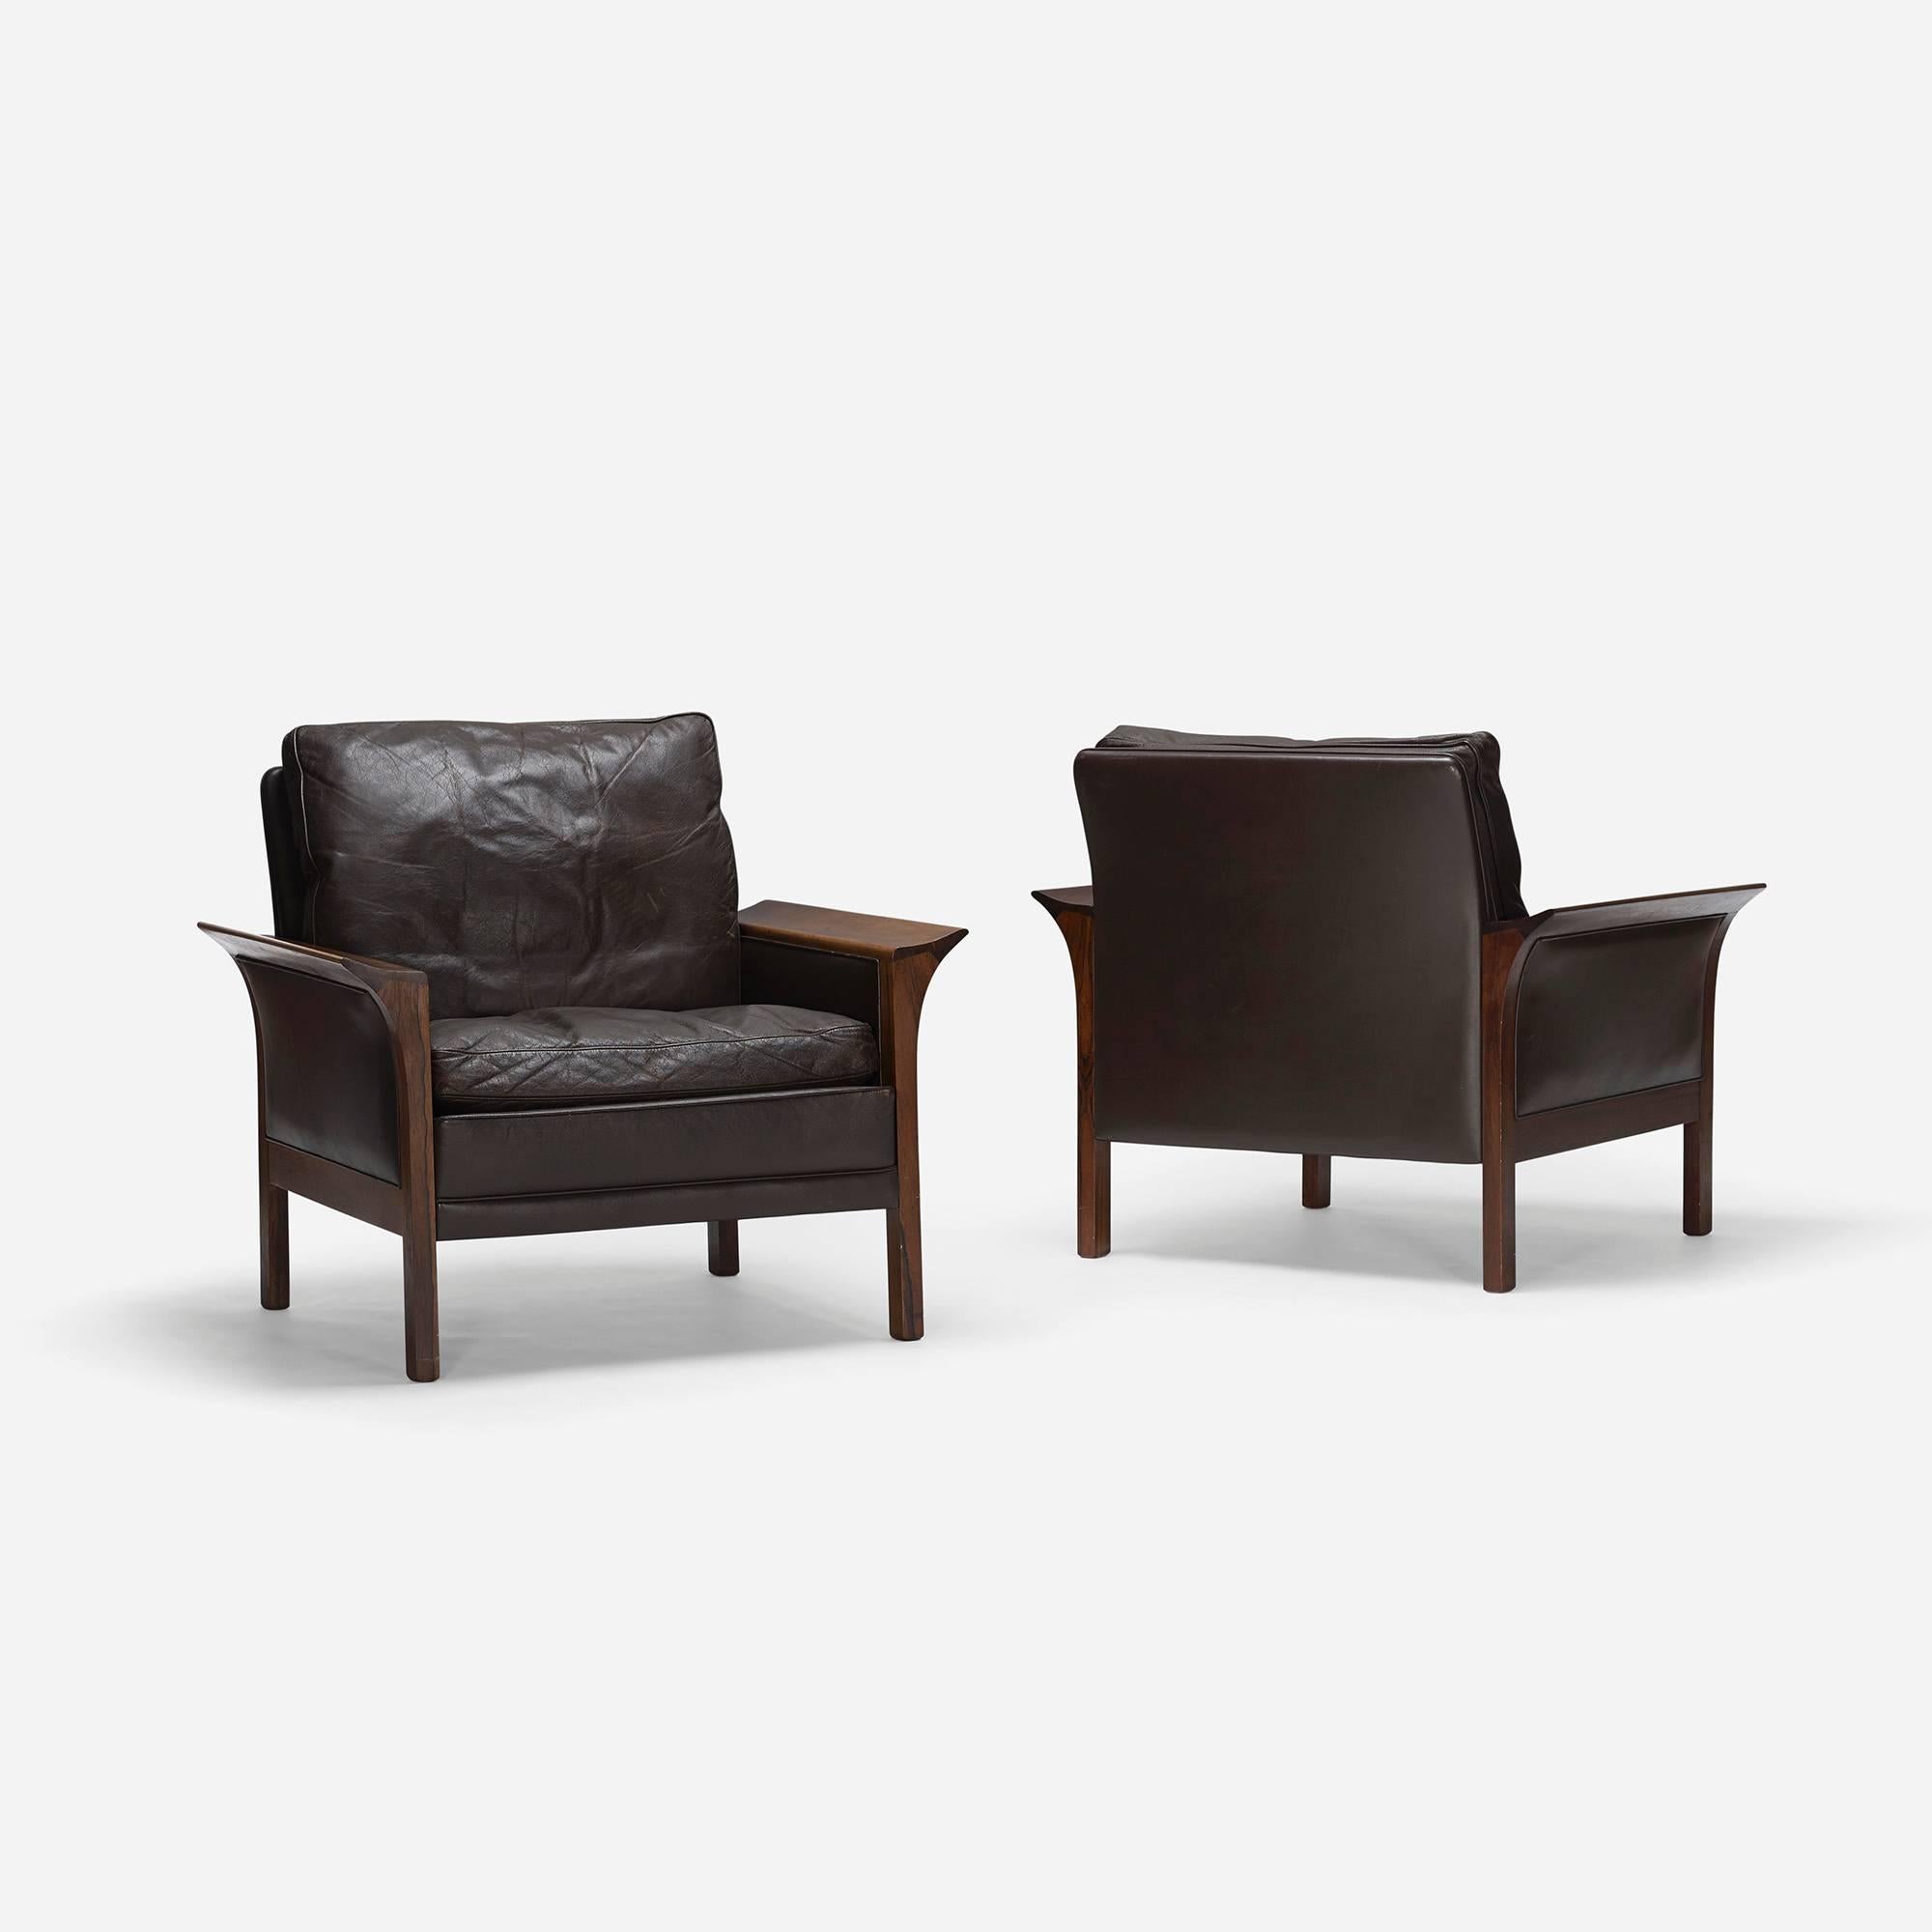 Lounge chairs model 400 pair by Hans Olsen for CS Møbler.